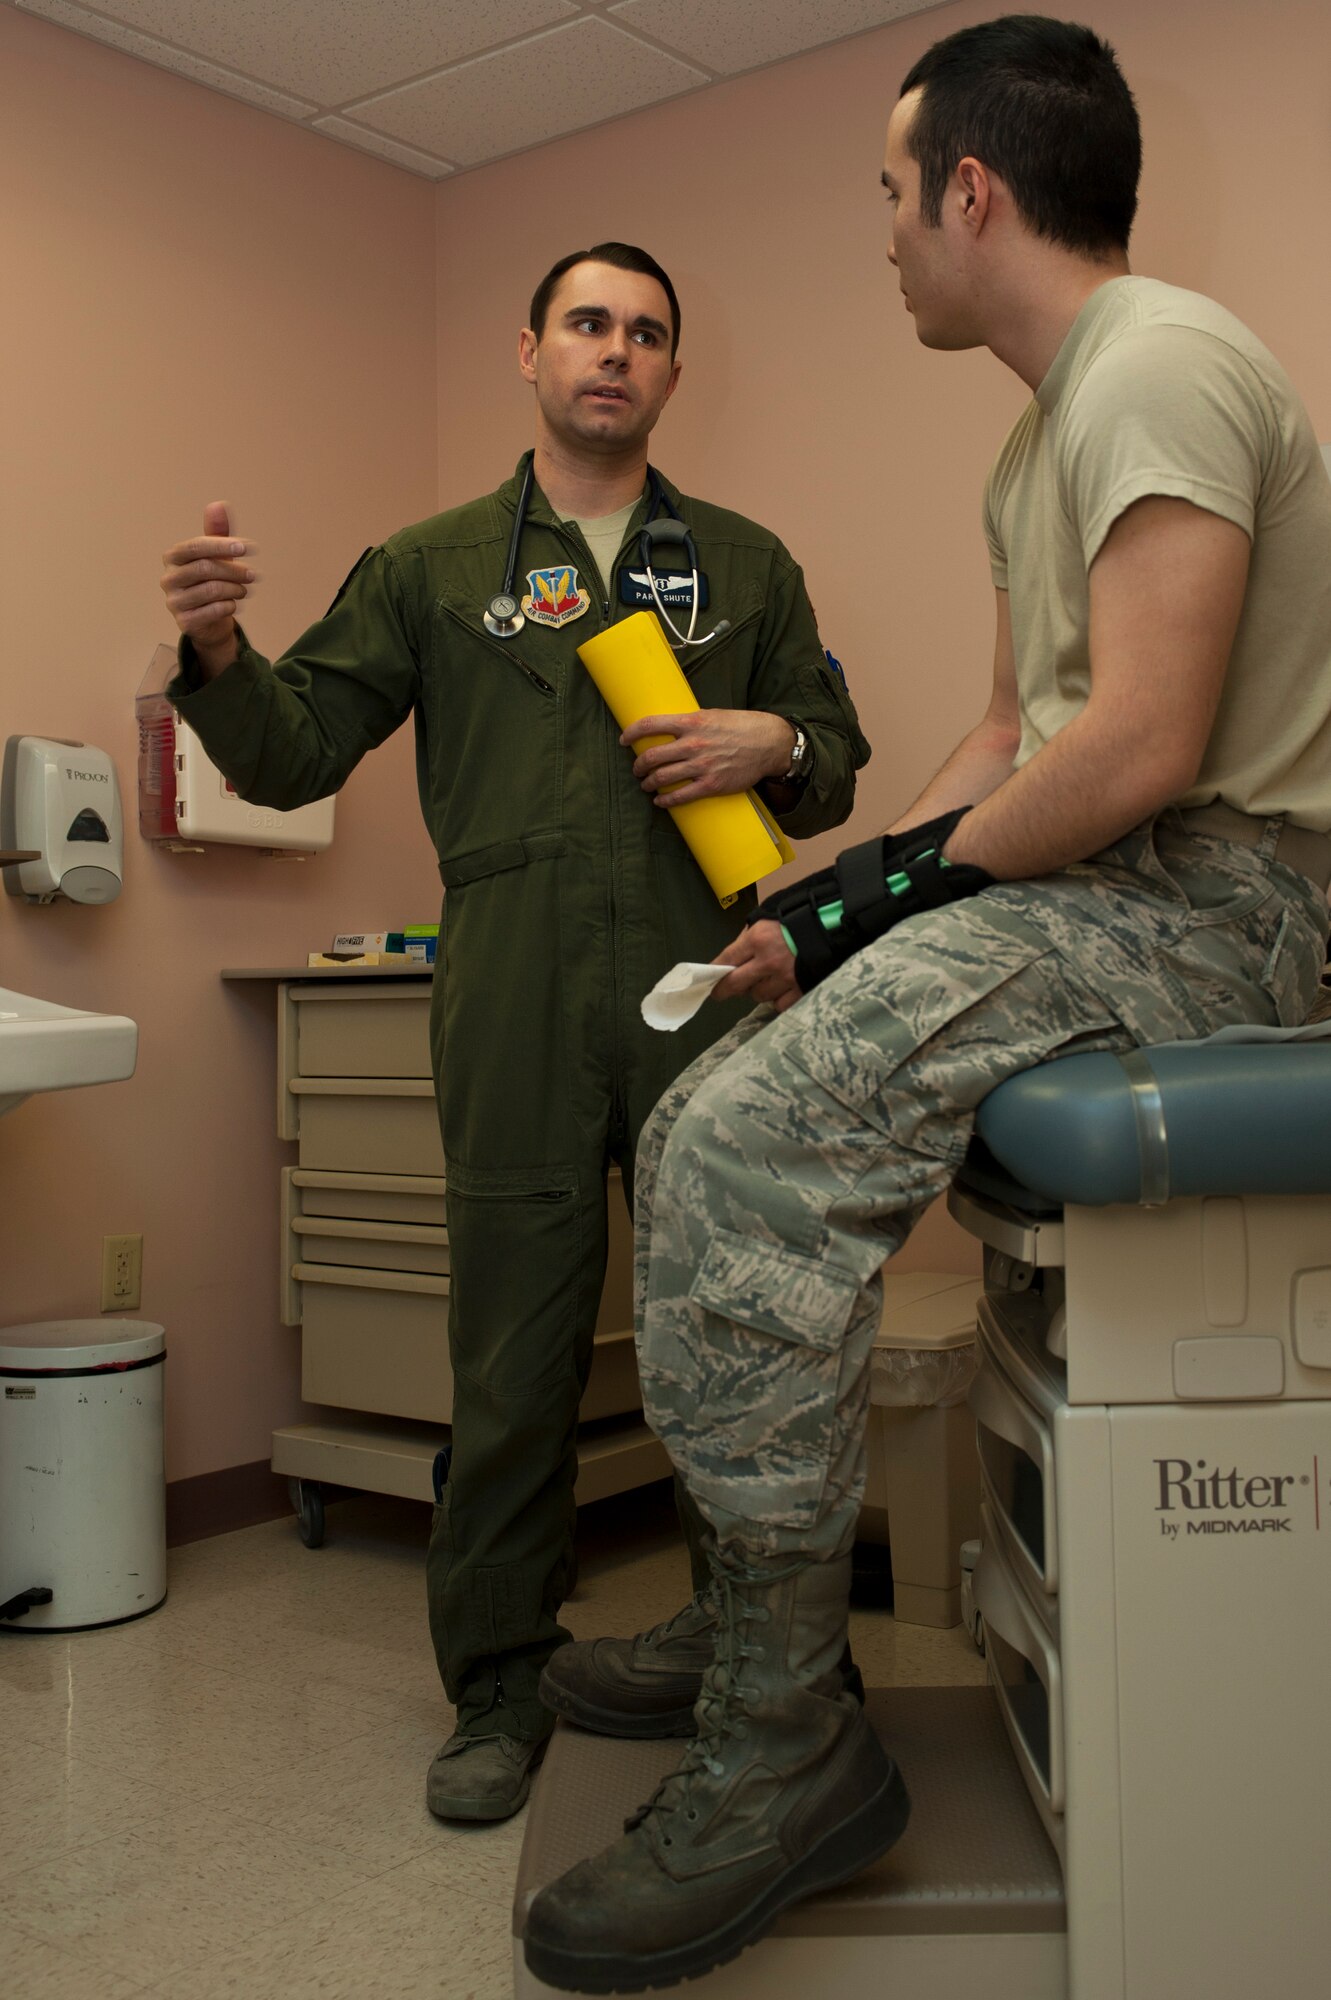 U.S. Air Force Capt. (Dr.) Thomas Shute, 42nd Attack Squadron flight surgeon, explains multiple causes for hearing problems to Senior Airman Phou Johnson, 757th Aircraft Maintenance Squadron avionics technician, during a follow-up occupational health exam Jan. 10, 2014, at Nellis Air Force Base. Nev. hearing problems commonly occur from the improper use of cotton swabs in the ear. (U.S. Air Force photo/Airman 1st Class Timothy Young)